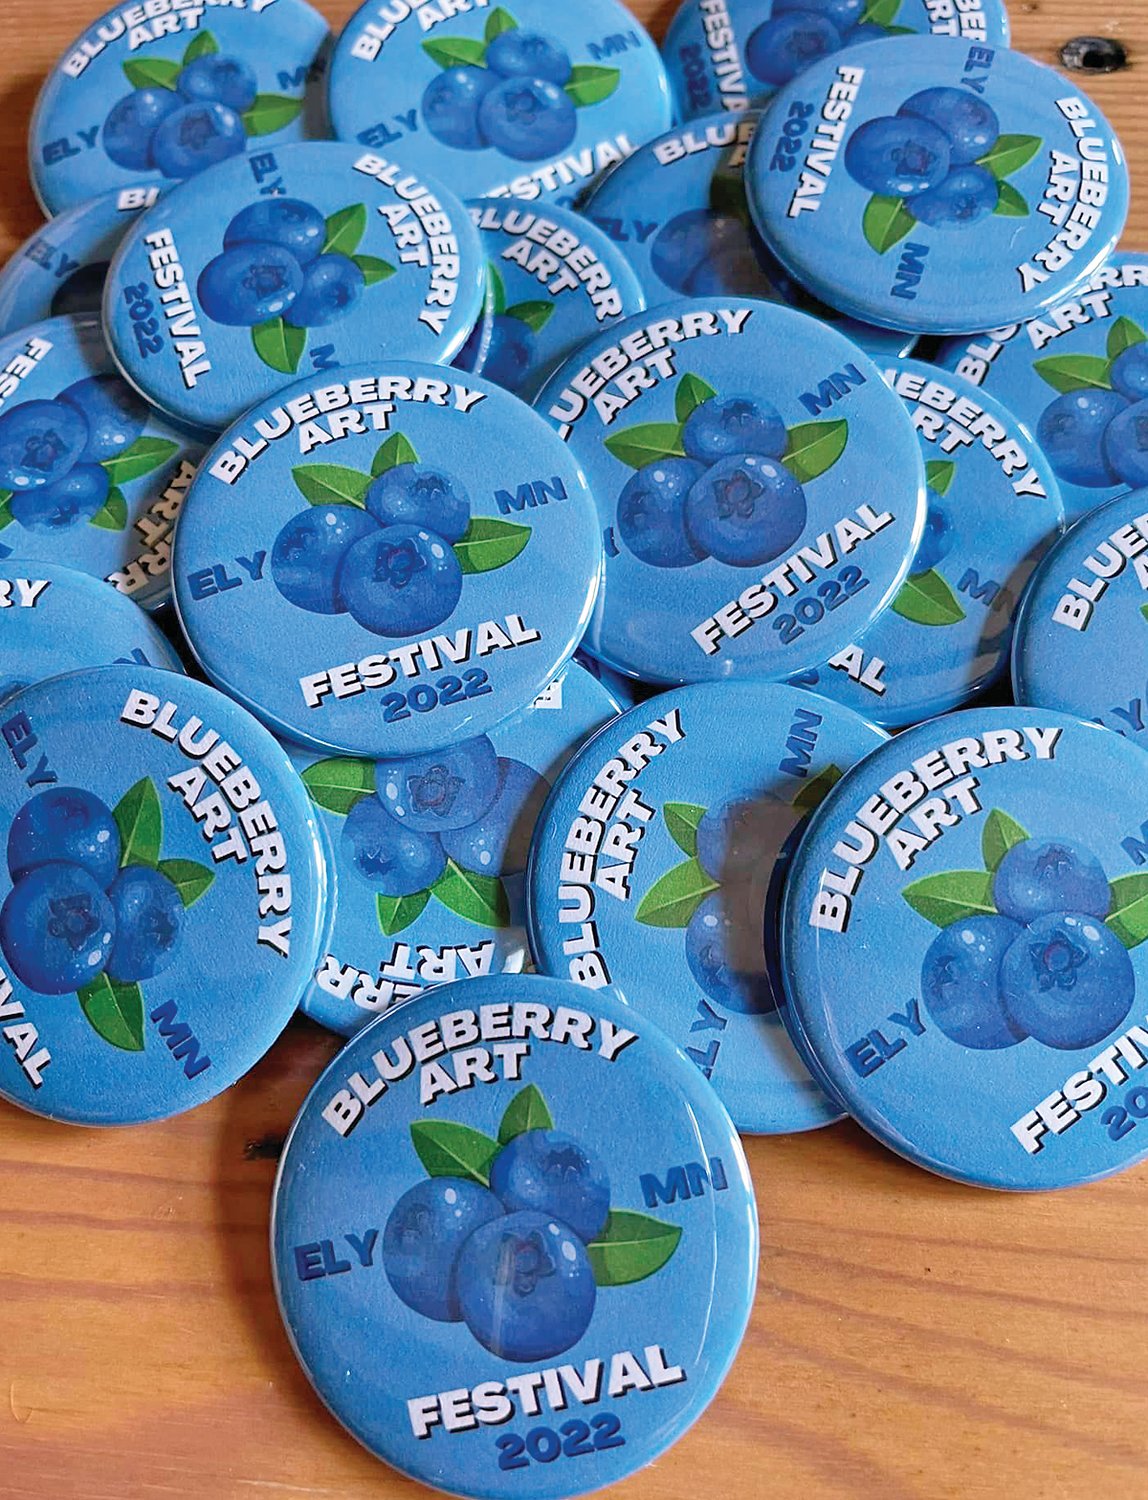 For the first time in Blueberry/Art Festival history, event pins are available at the Ely Chamber of Commerce and at the chamber's booth at the festival.